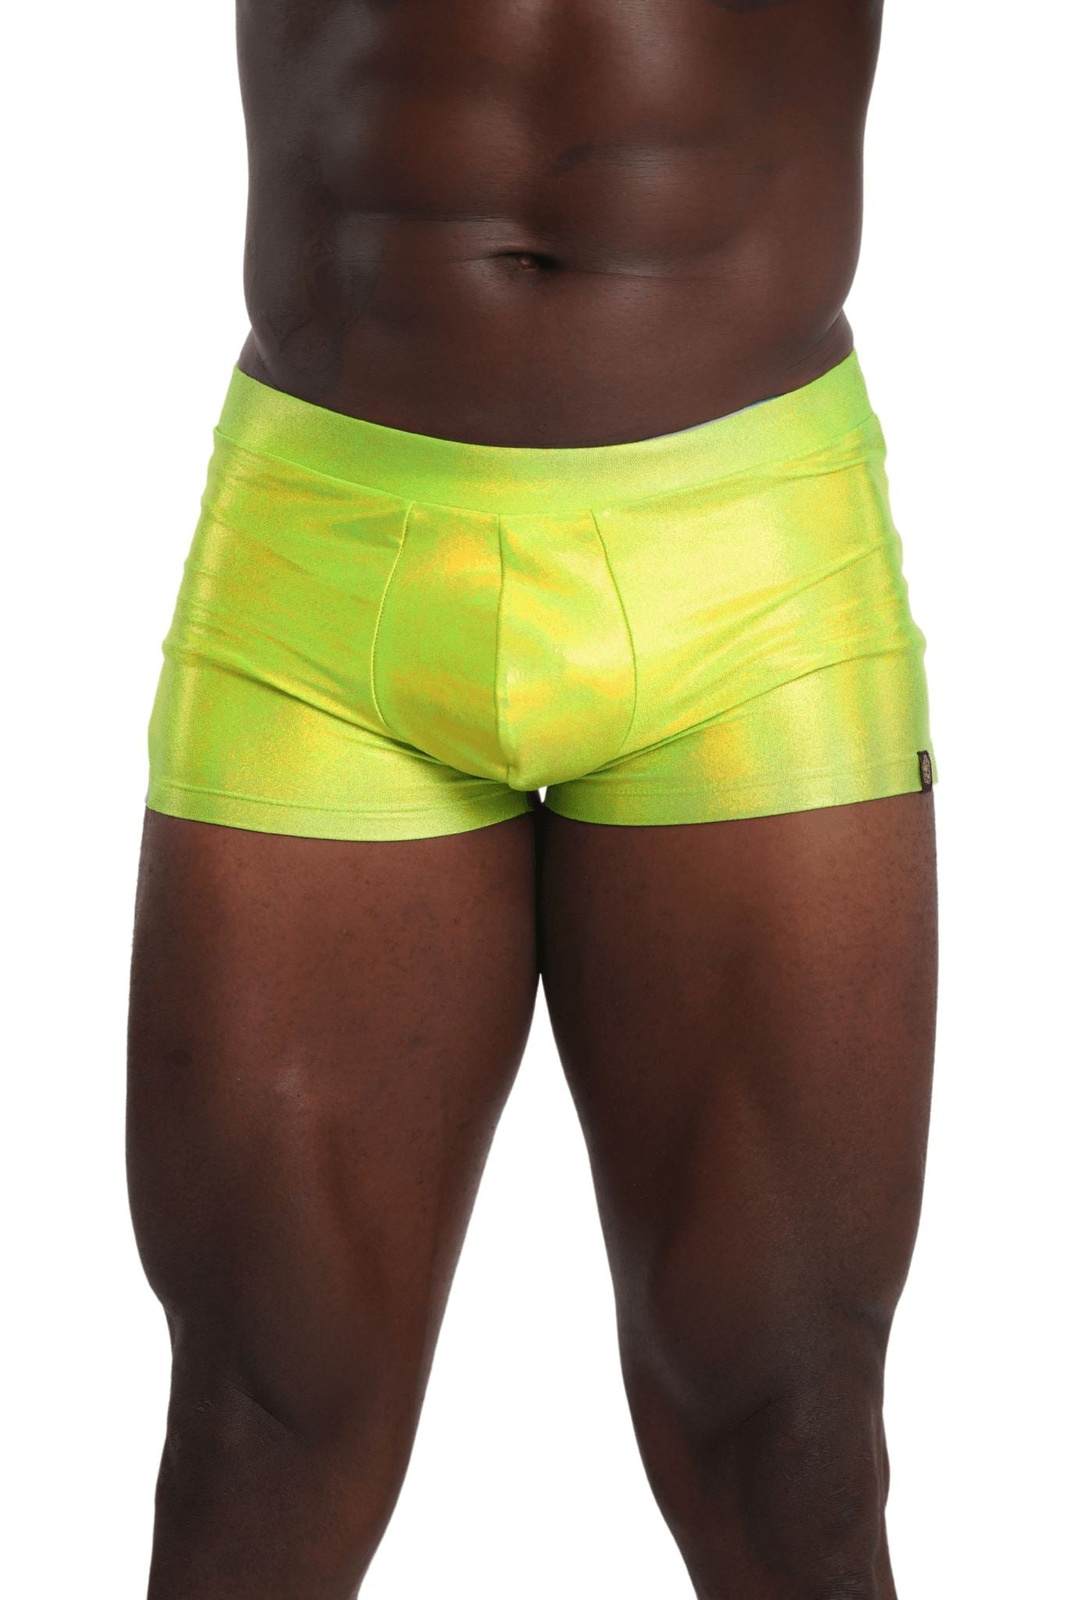 Neon Green Limelight Mens Booty Shorts with pouch from Love Khaos